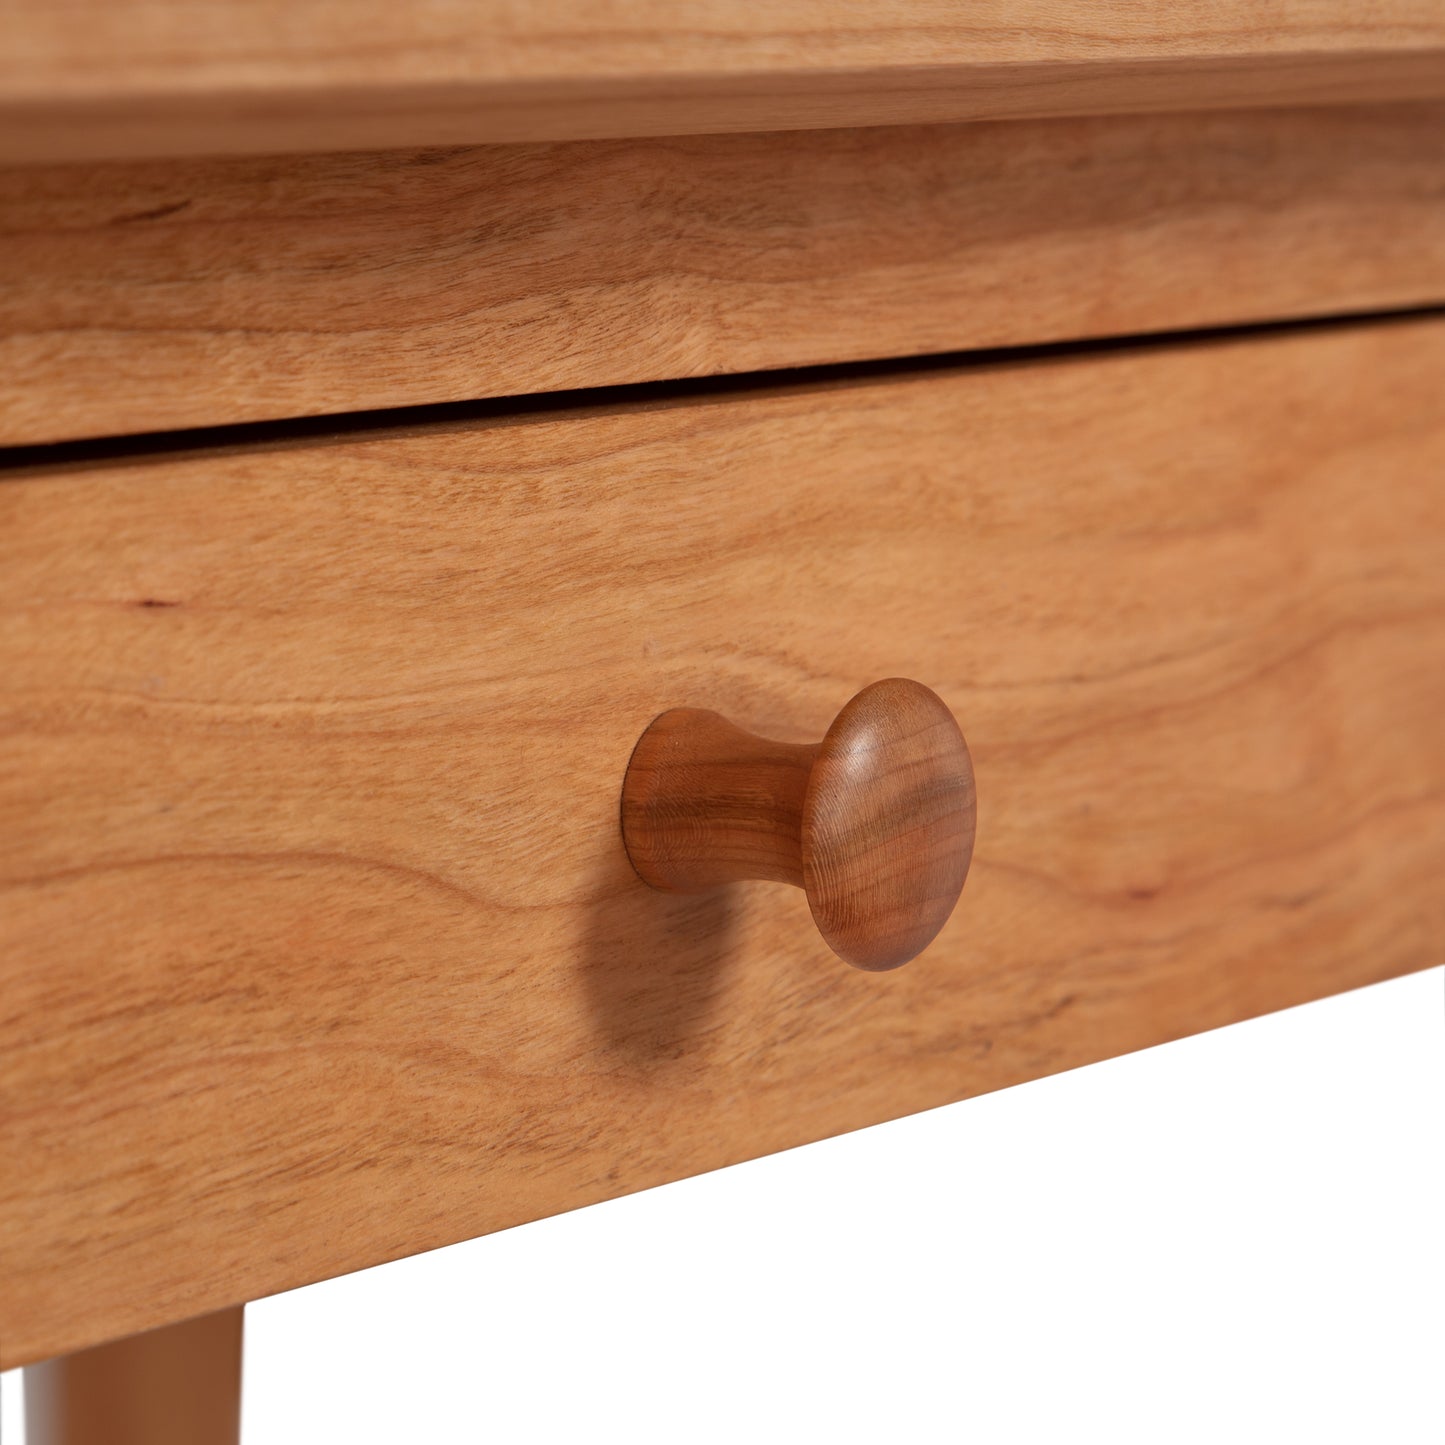 A close up of a natural cherry wooden drawer with a knob on a Maple Corner Woodworks American Shaker Writing Desk from Vermont.